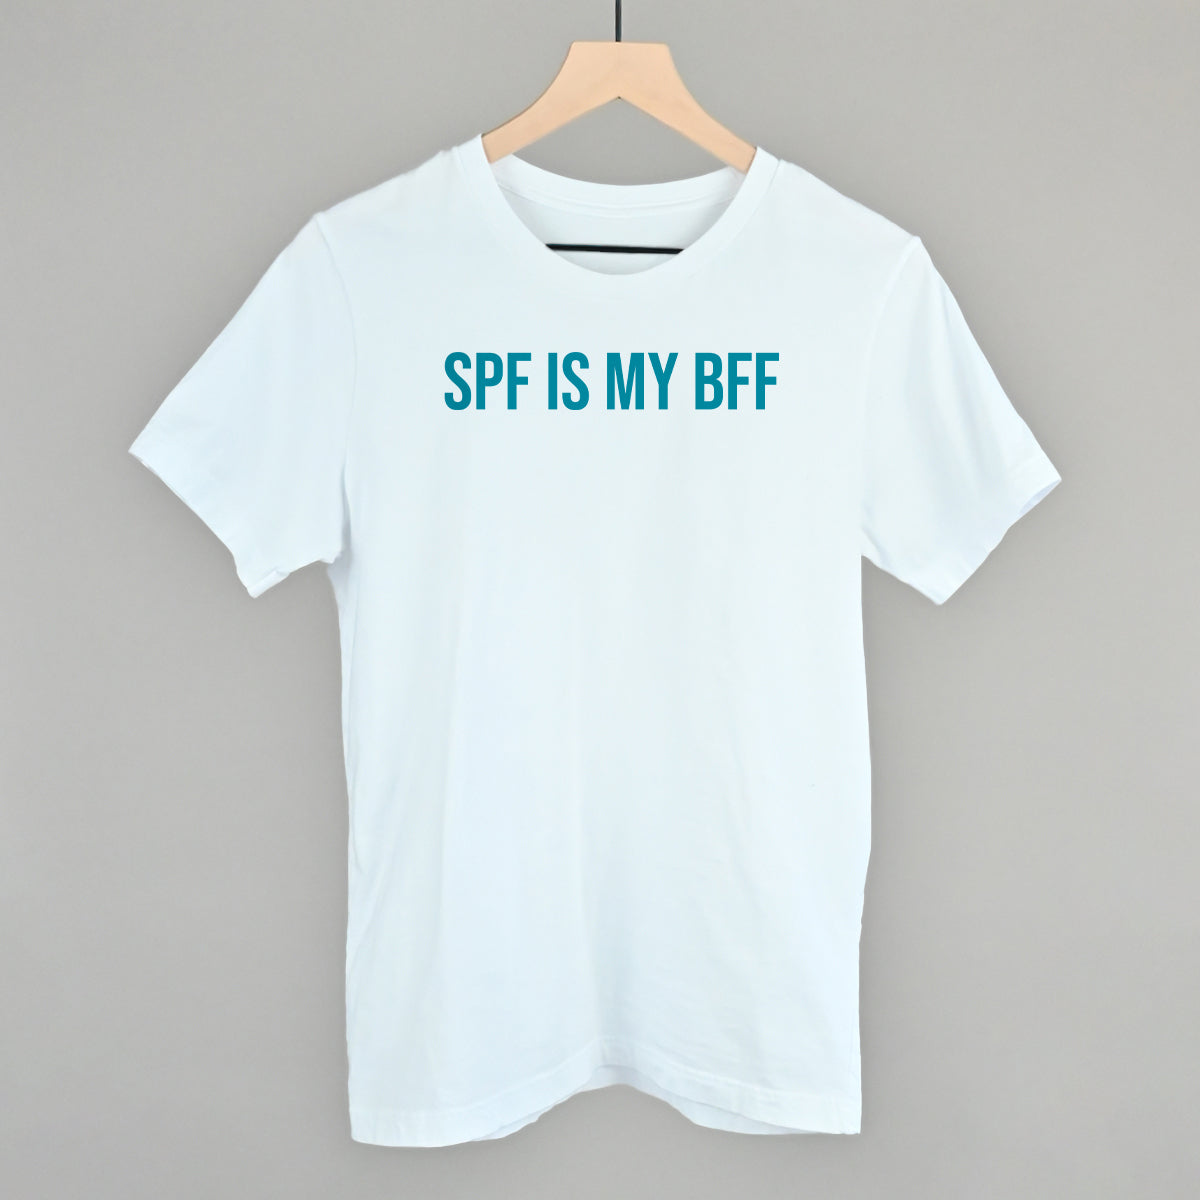 SPF is my BFF